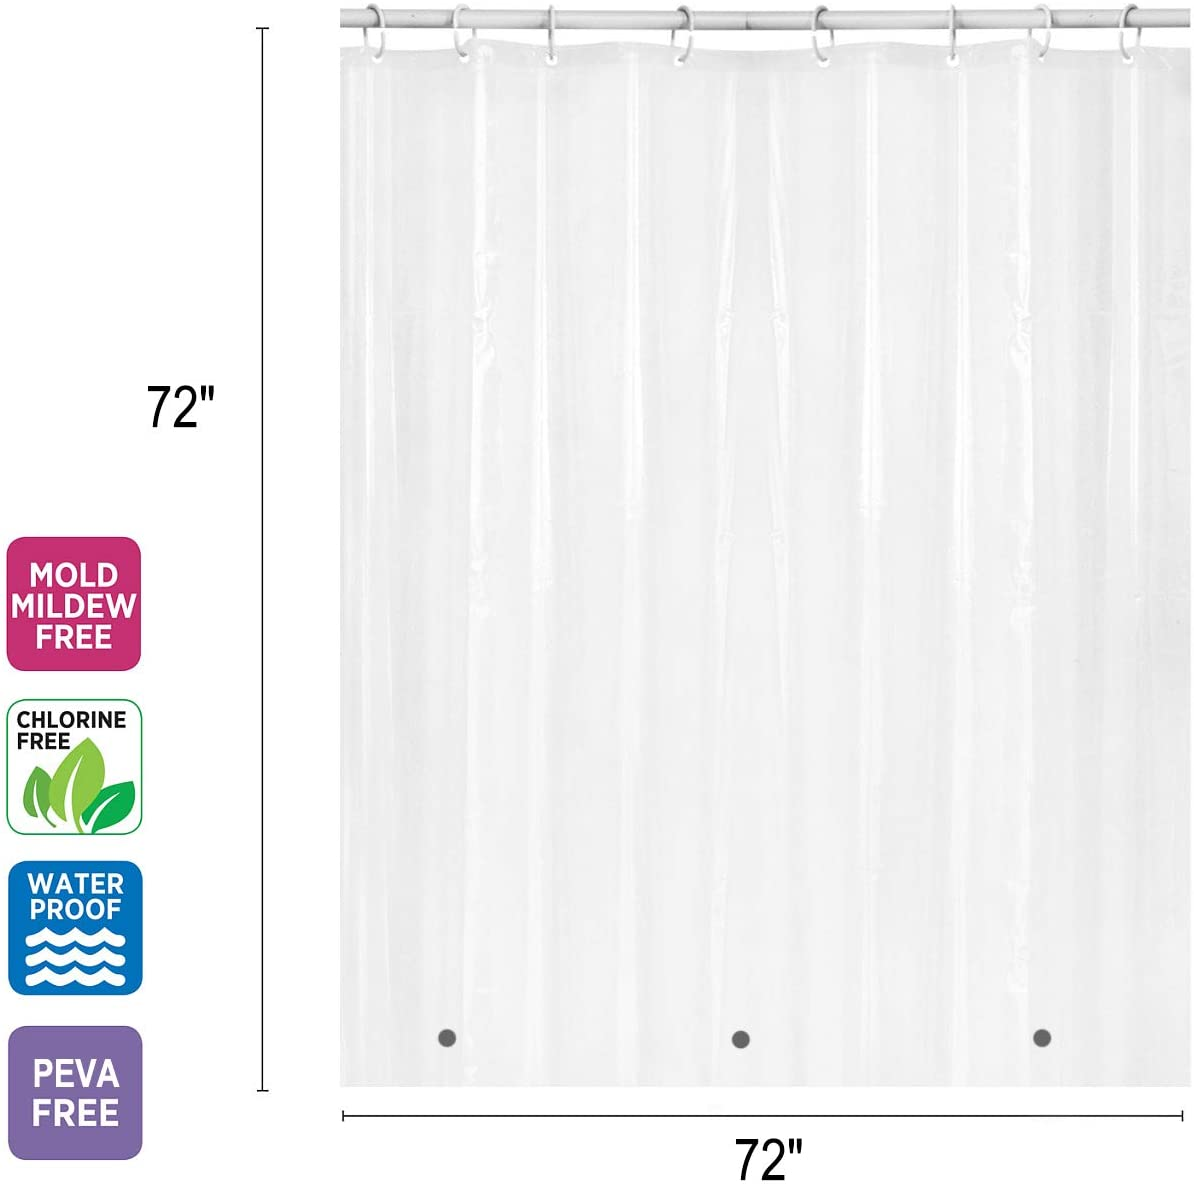  Clear Shower Curtain Liner - 72X72 Plastic Shower Curtain Liner 4 Gauge PEVA Lightweight Waterproof for Bathroom Shower and Bathtub with 3 Magnets,1 Pack